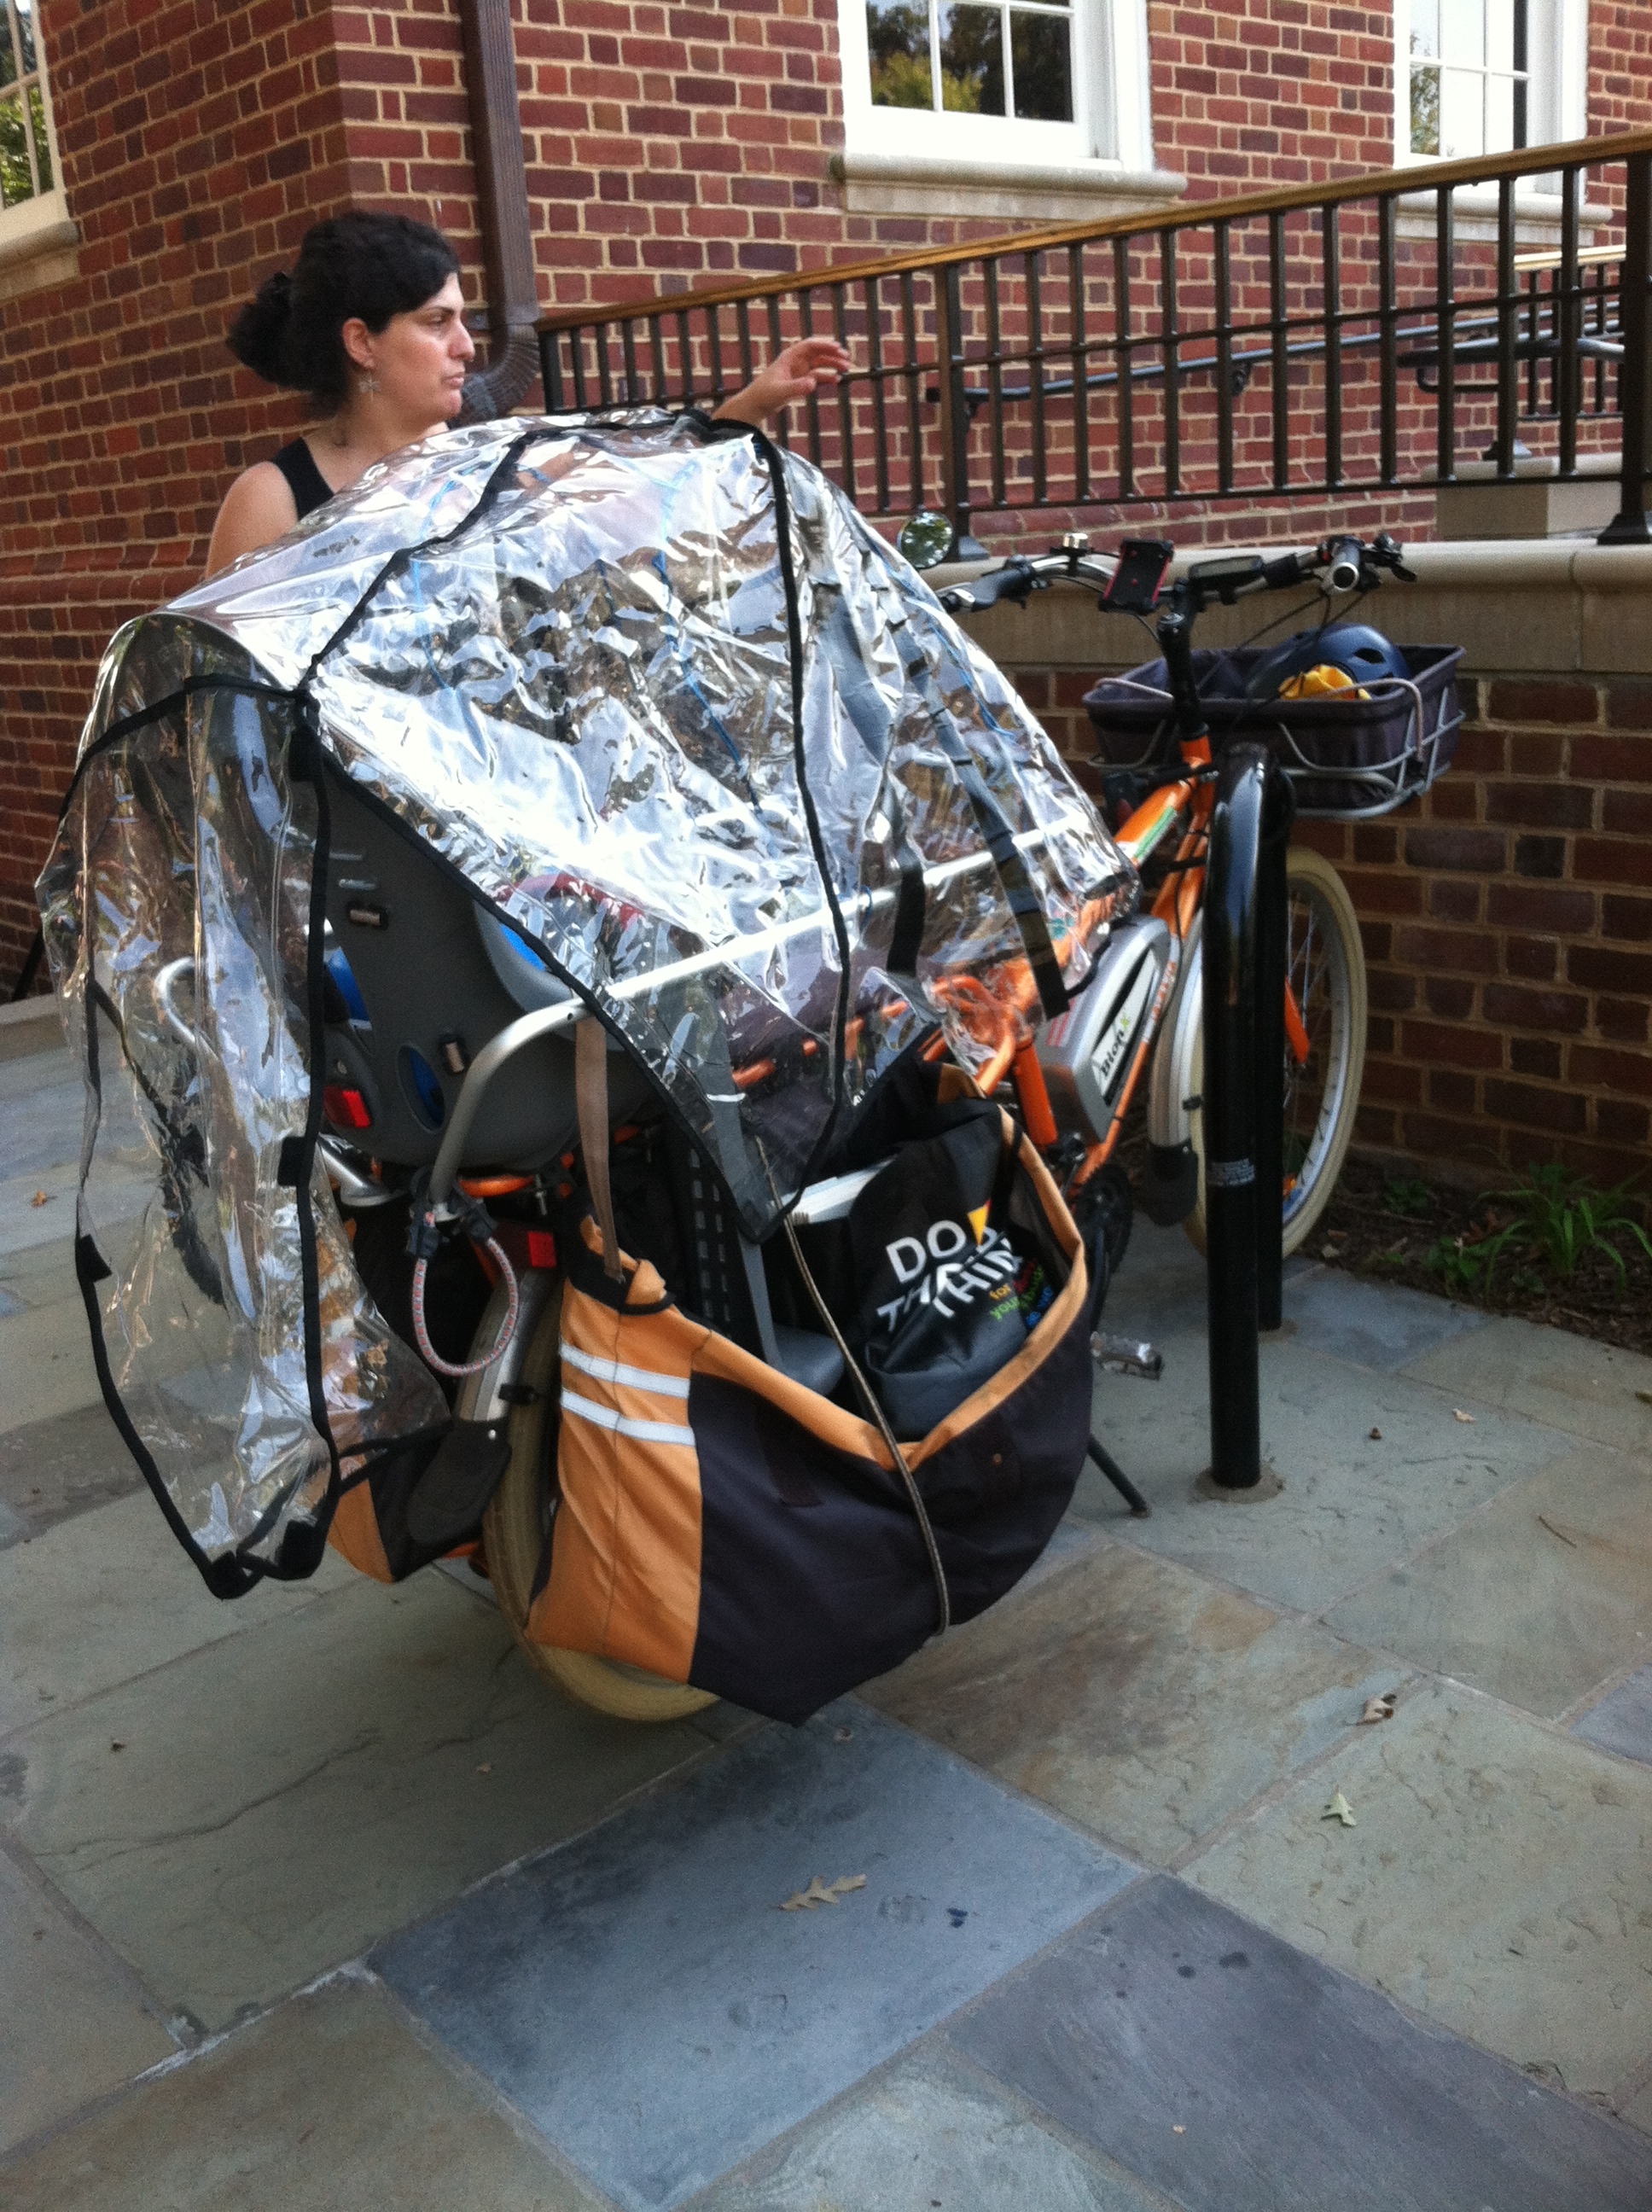 Megan from Kidical Mass D.C. shows off her Yuba cargo bike, with two kids seats, "monkey bars," panniers, and a rain cover.